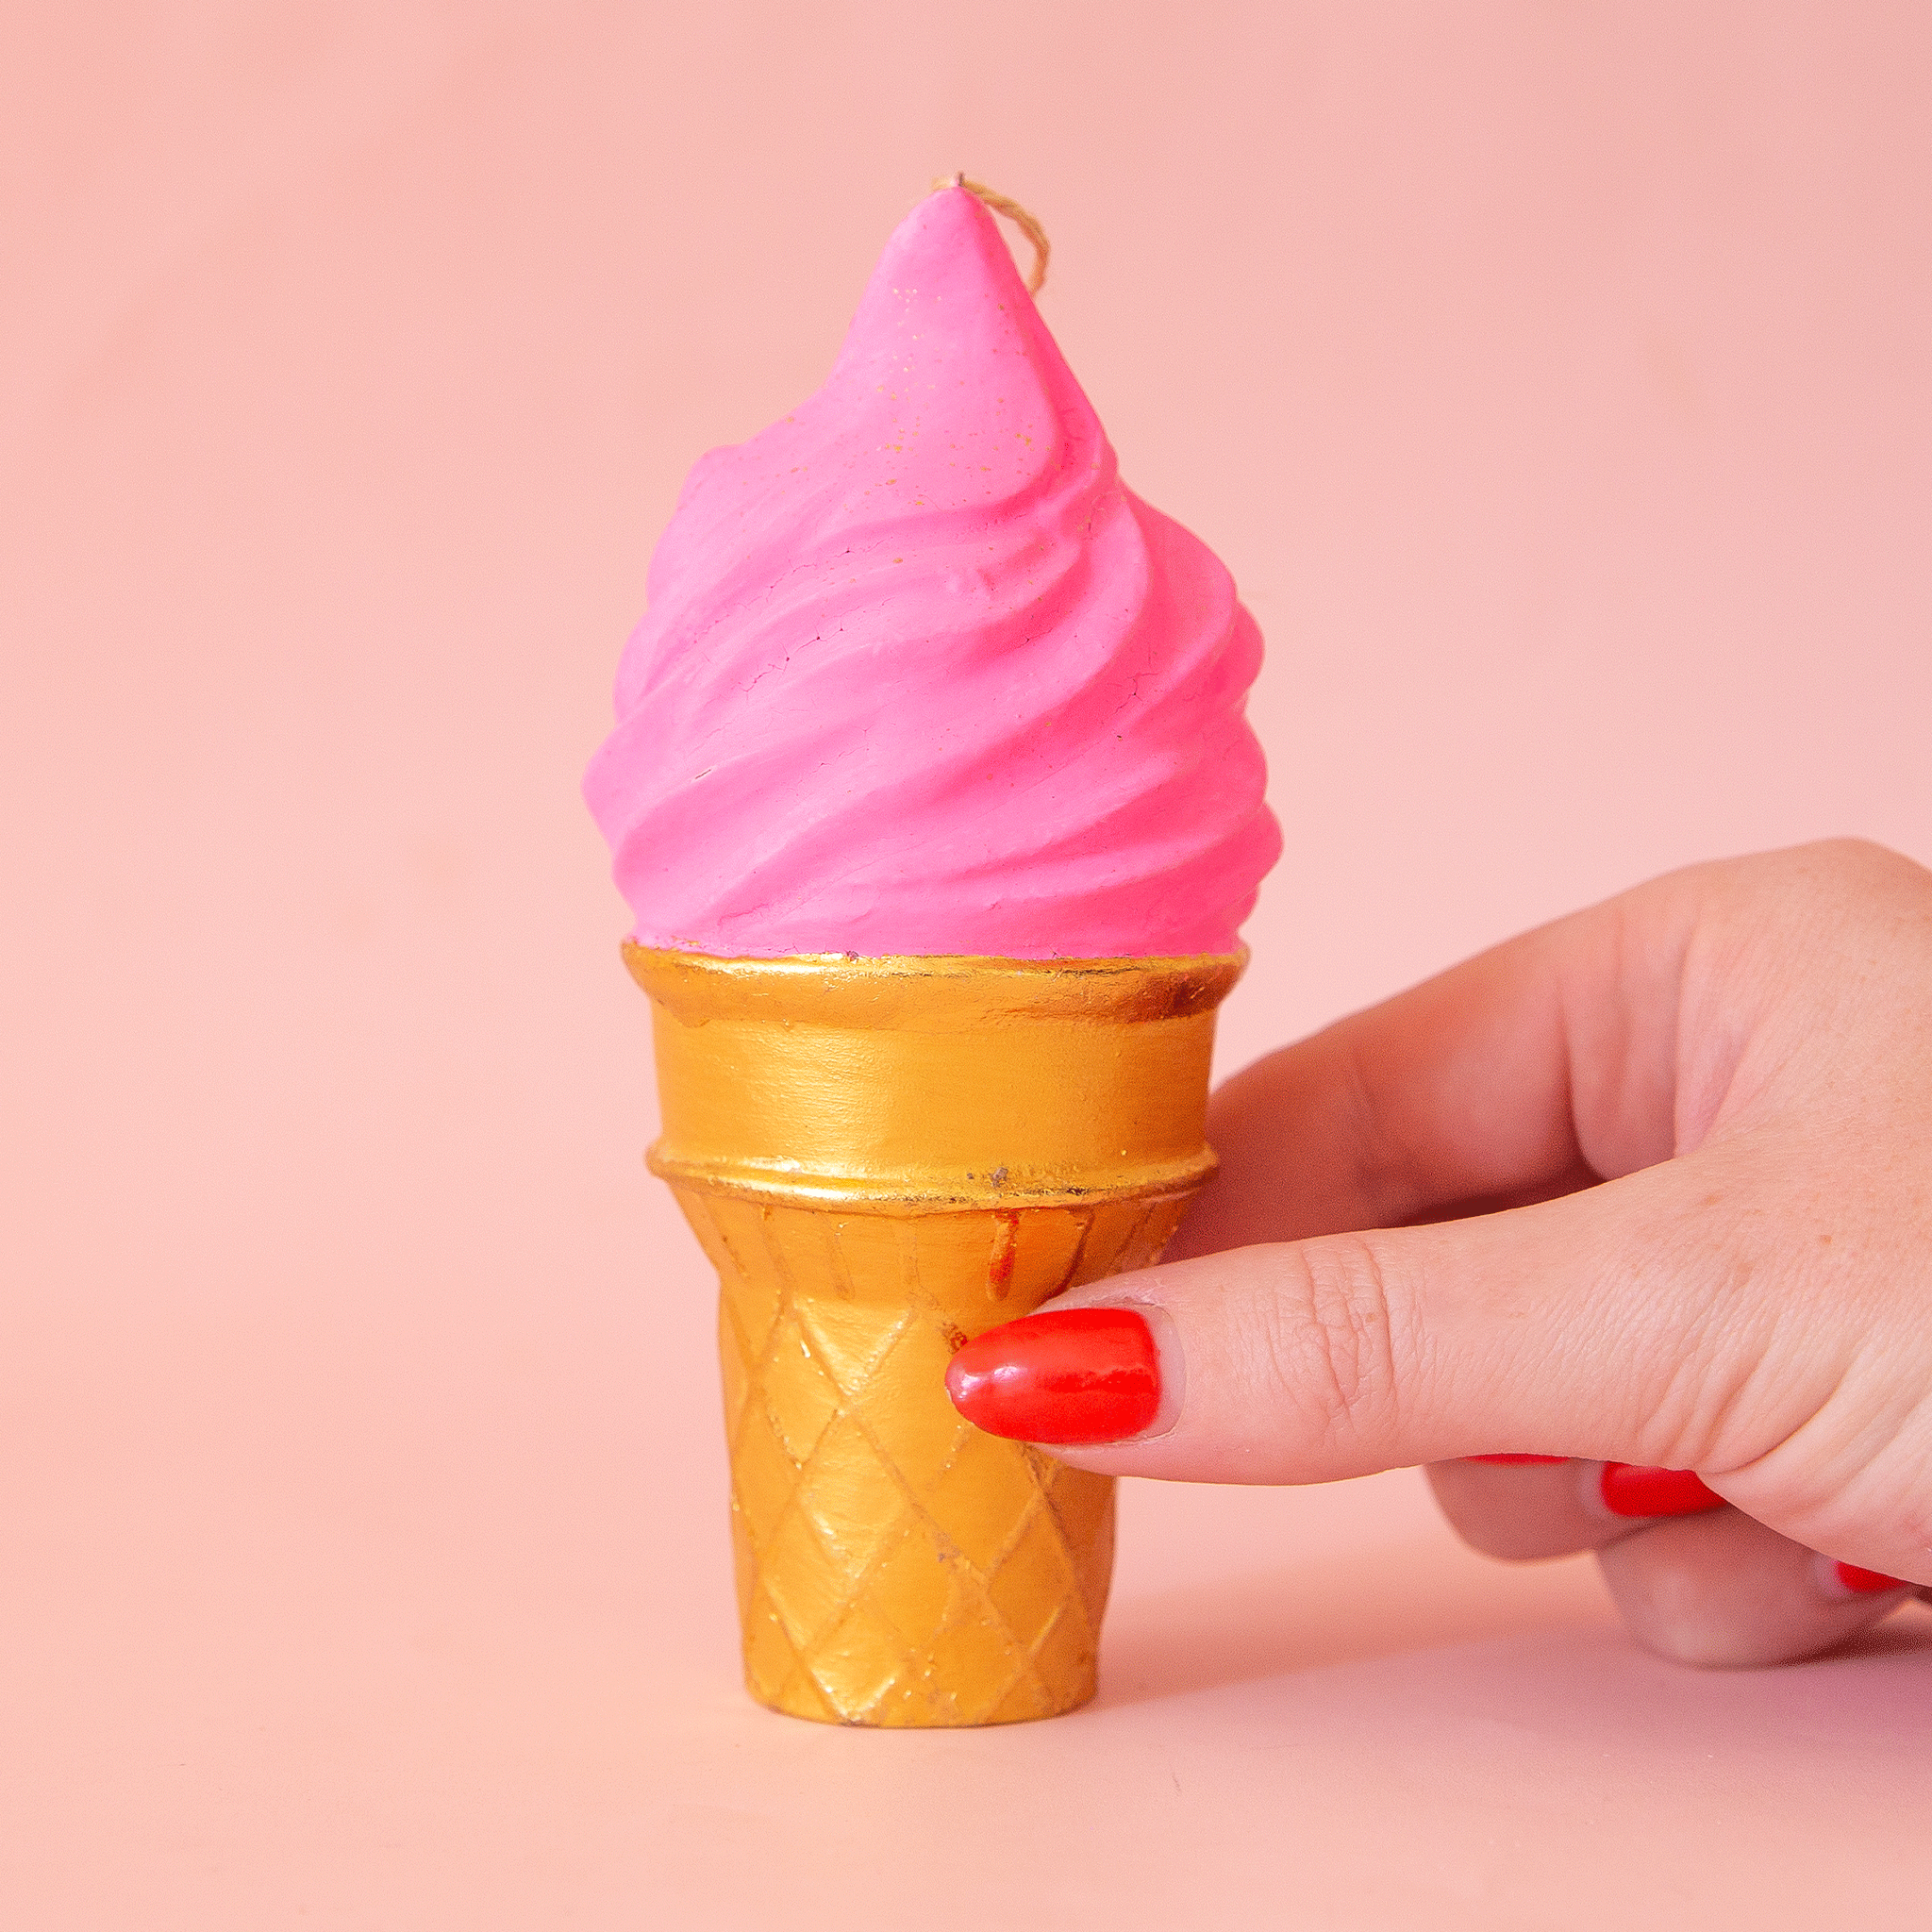 On a pink background is a dark pink ice cream cone shaped ornament.